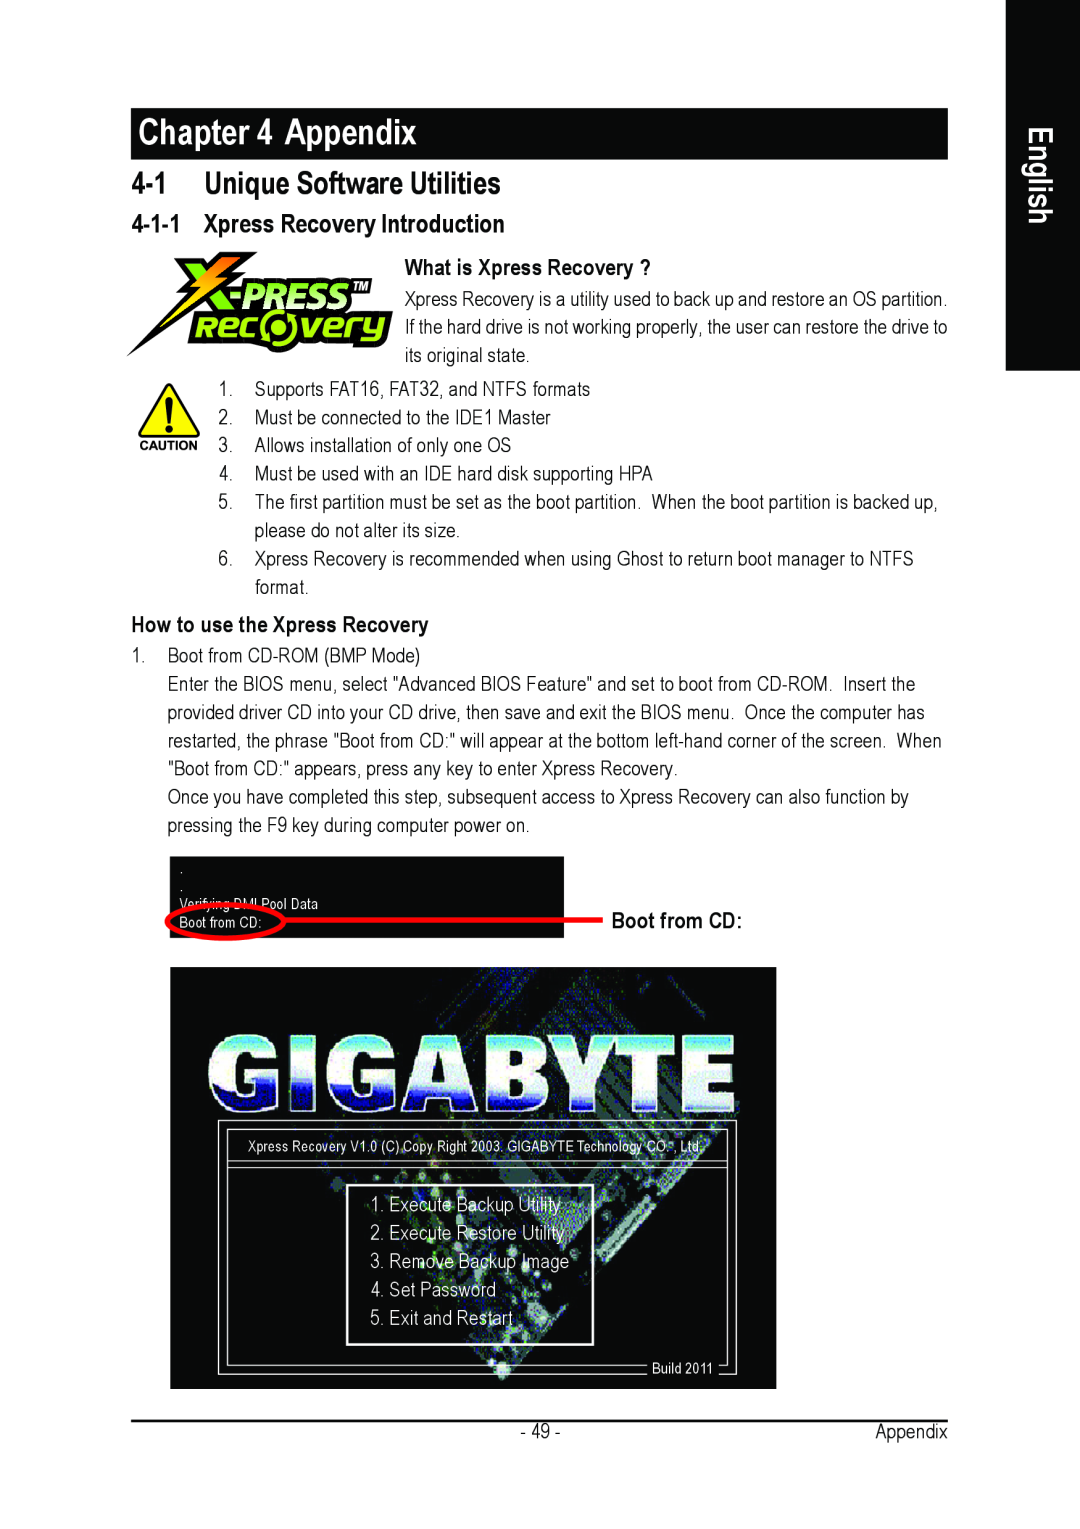 Gigabyte GA-8I865PEM-775 Appendix, Unique Software Utilities, Xpress Recovery Introduction, What is Xpress Recovery ? 